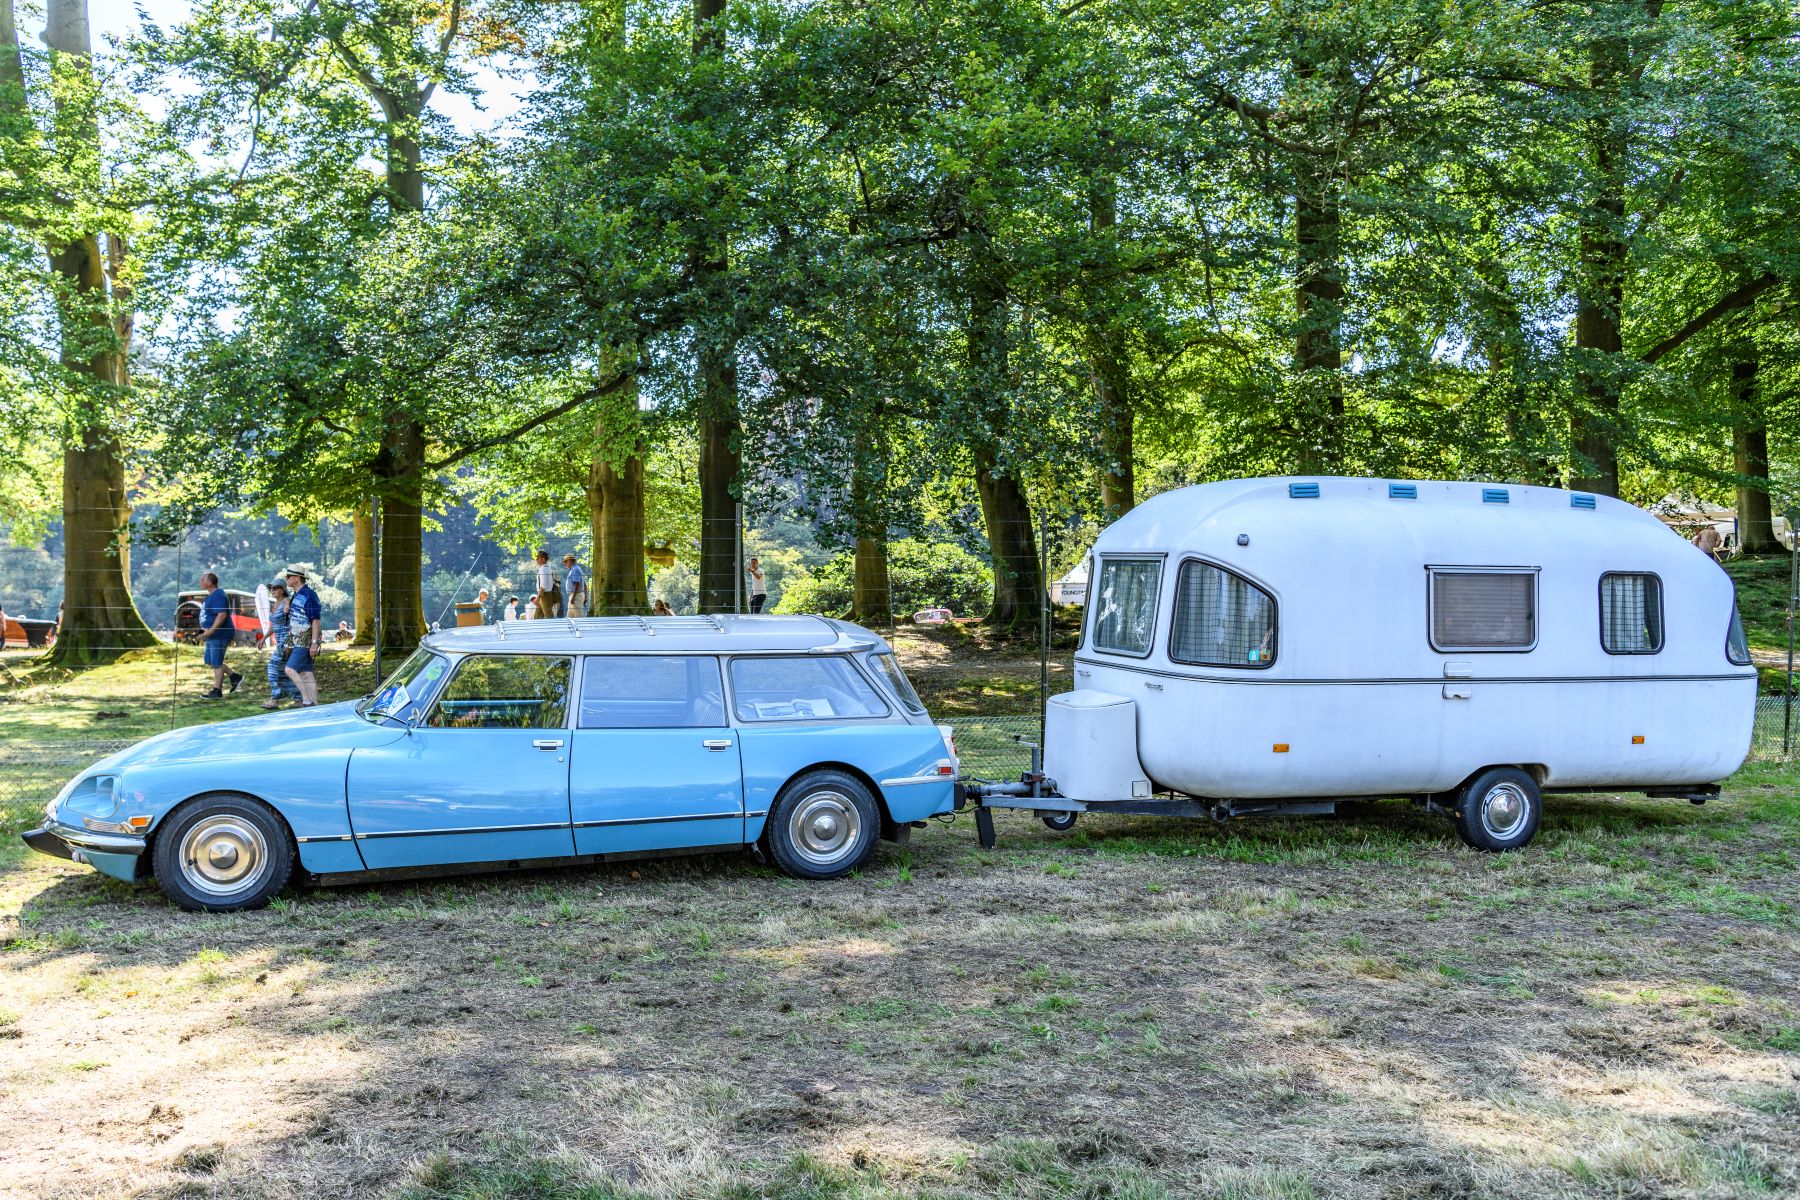 A station wagon towing an RV camper in a forest campground